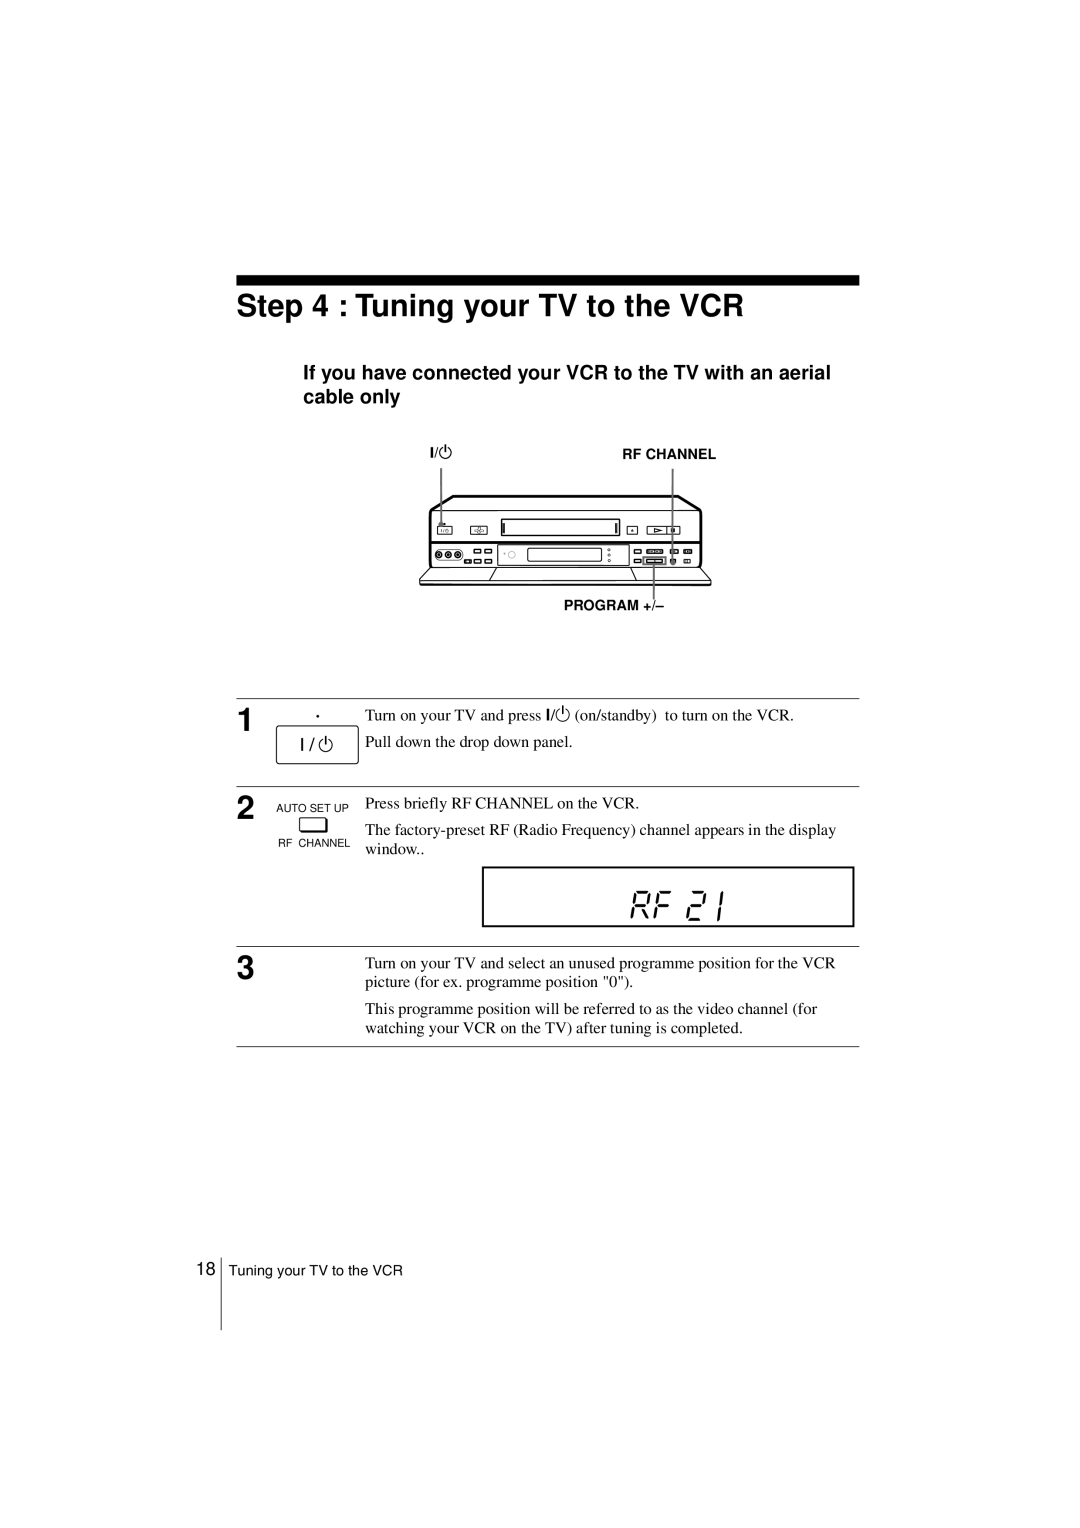 Sony SLV-SF990G manual Tuning your TV to the VCR, If you have connected your VCR to the TV with an aerial cable only 